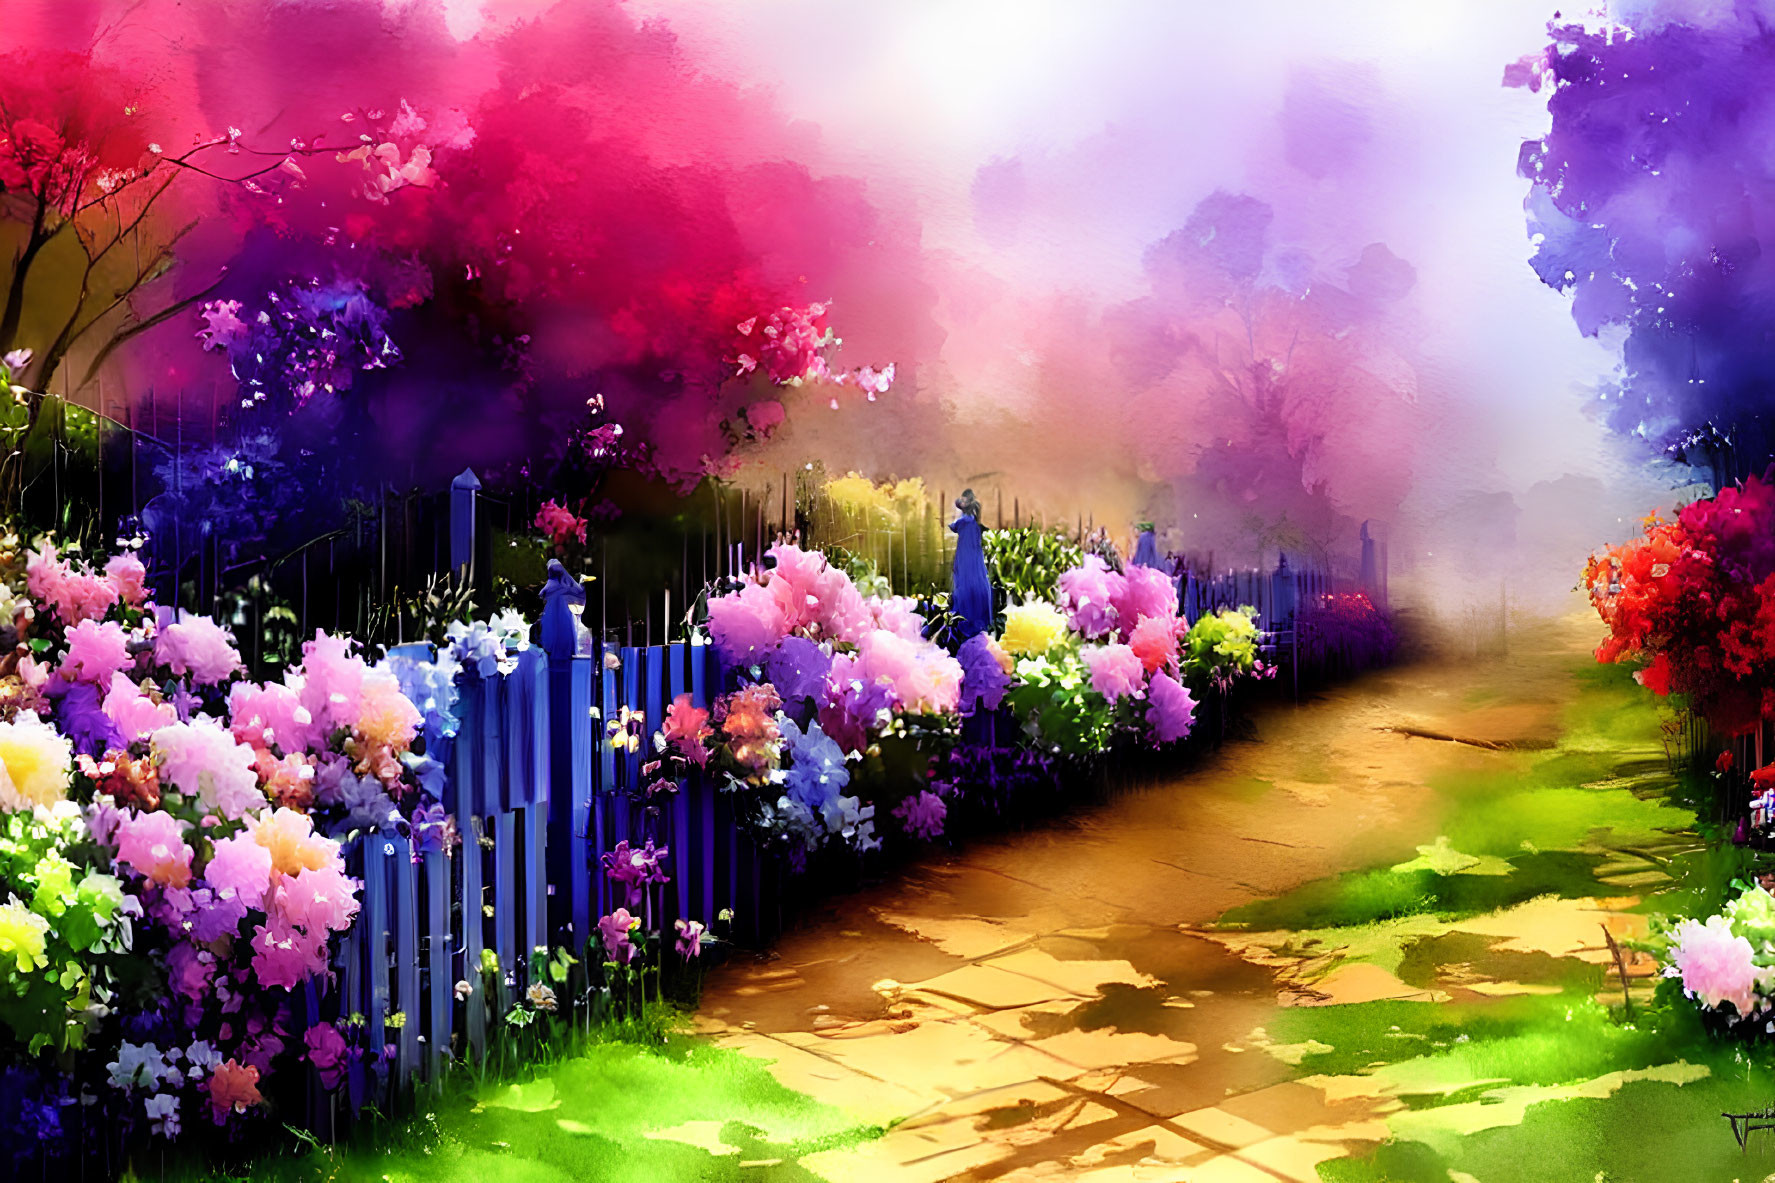 Colorful Garden Path with Blooming Flowers and Blue Picket Fence